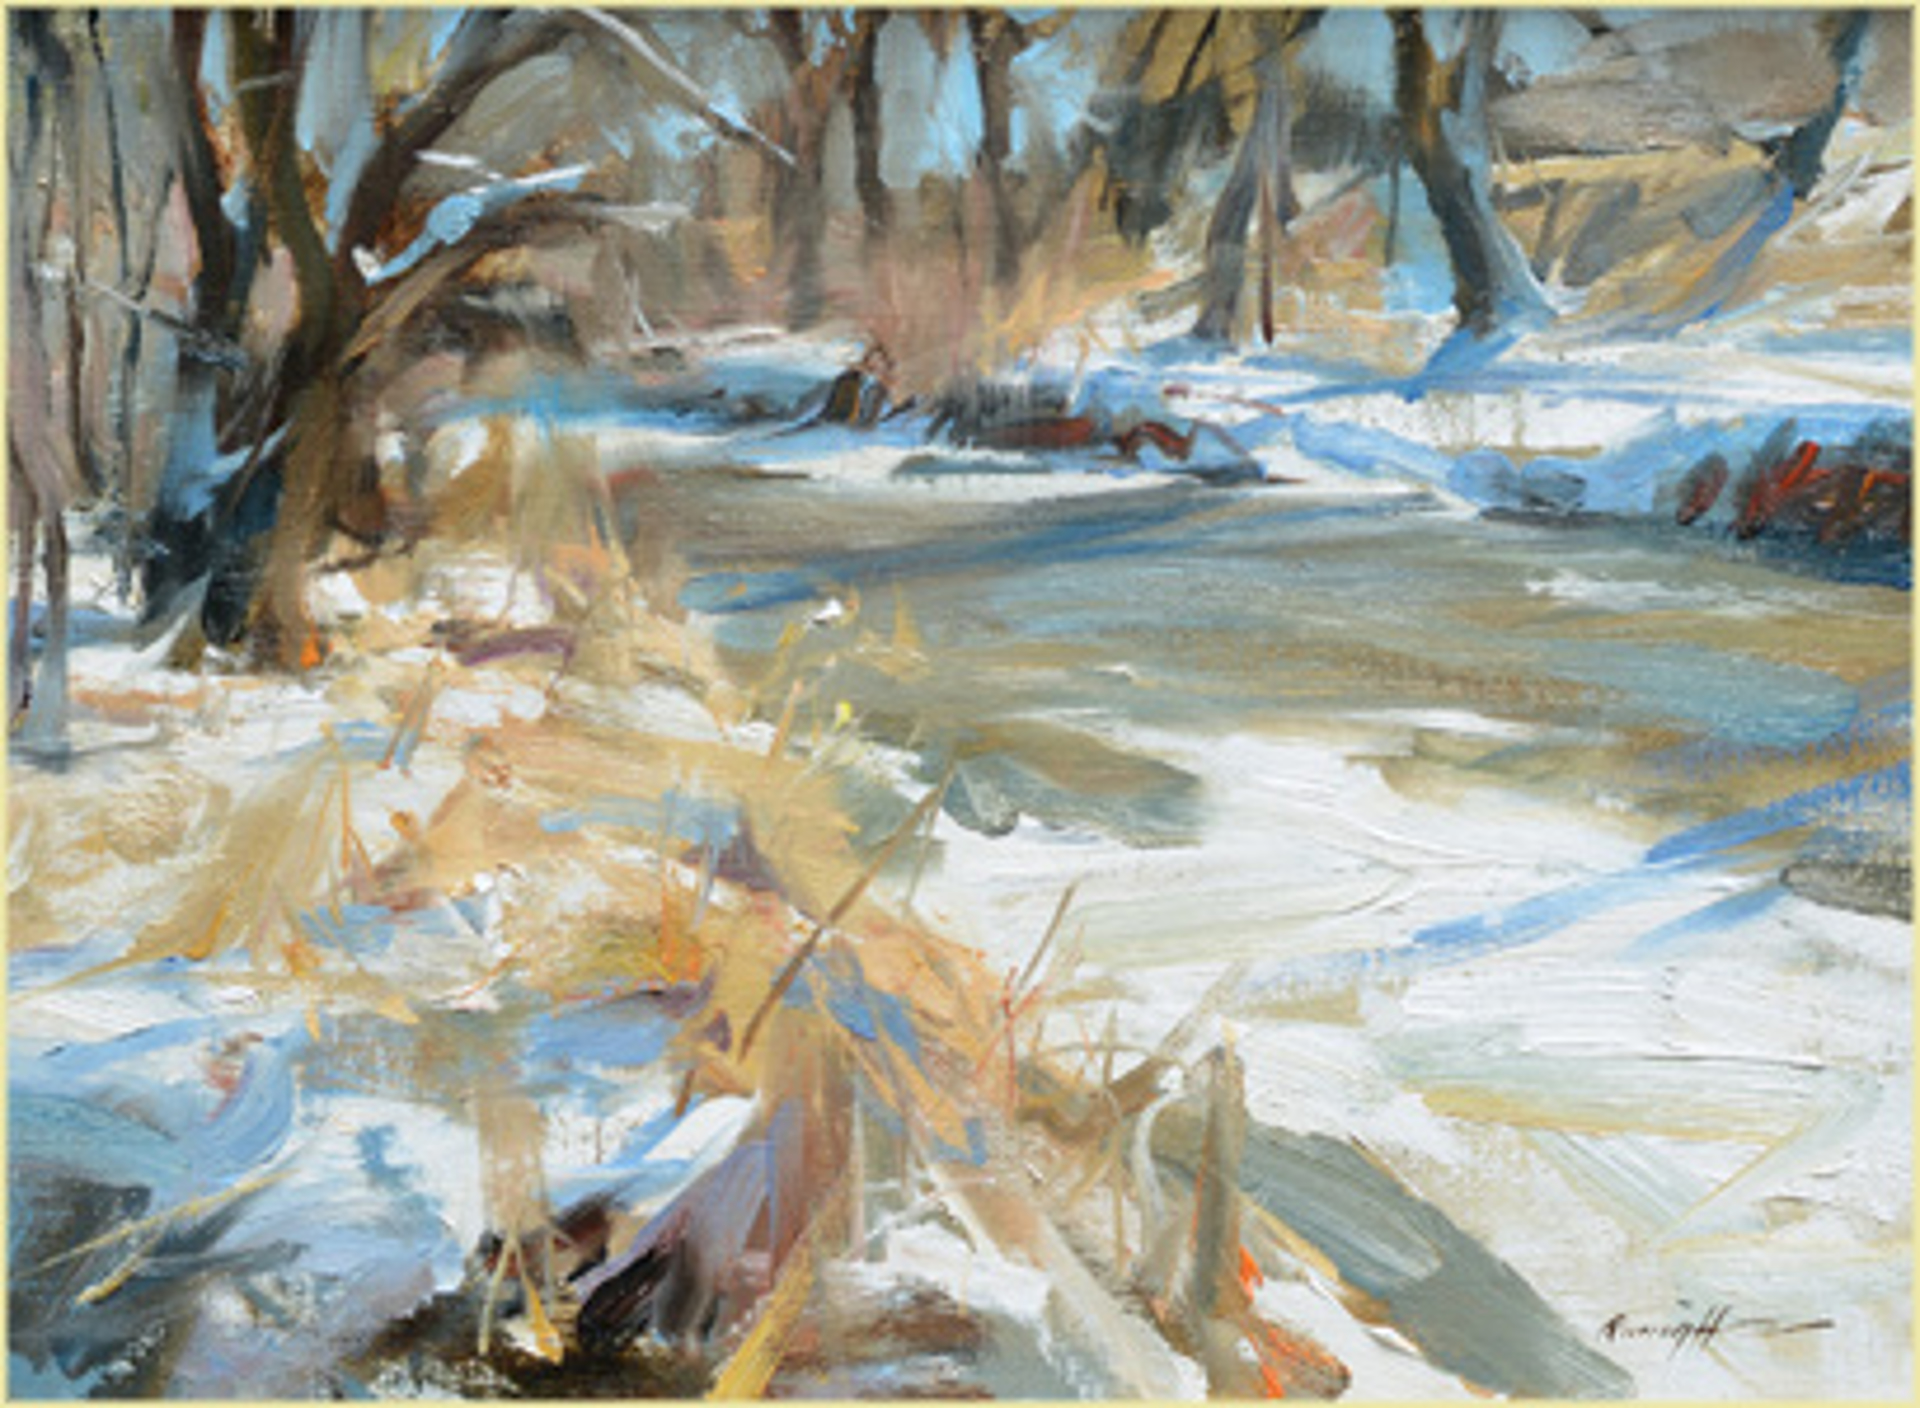 Cherry Creek in January by Quang Ho